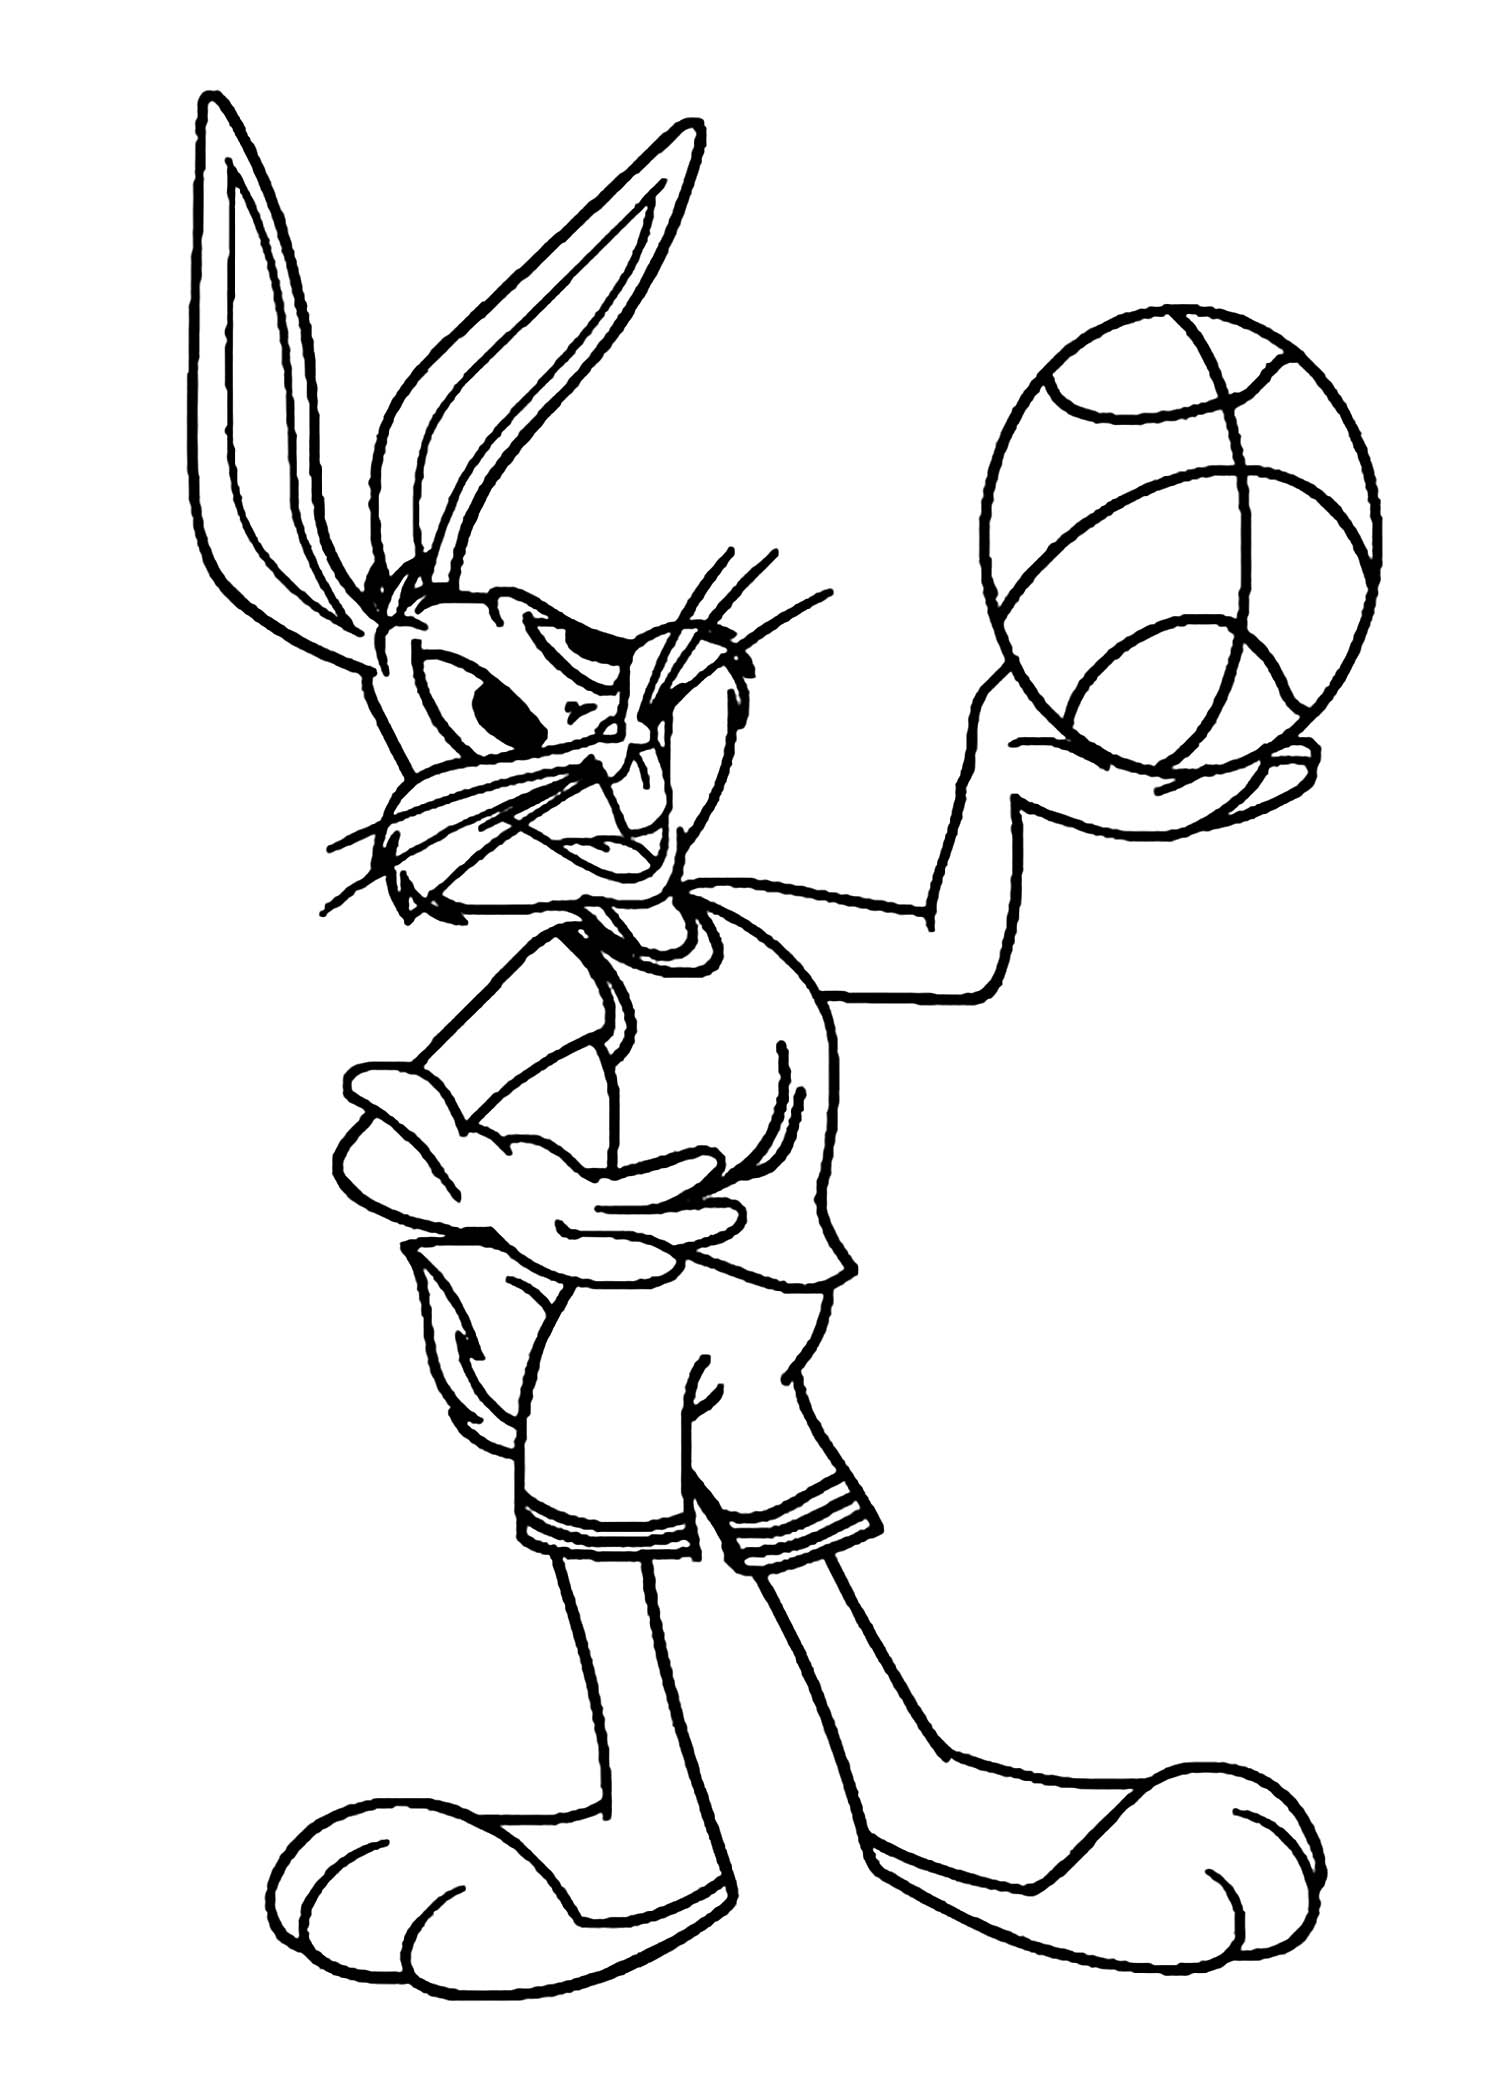 Easy basketball coloring pages for kids